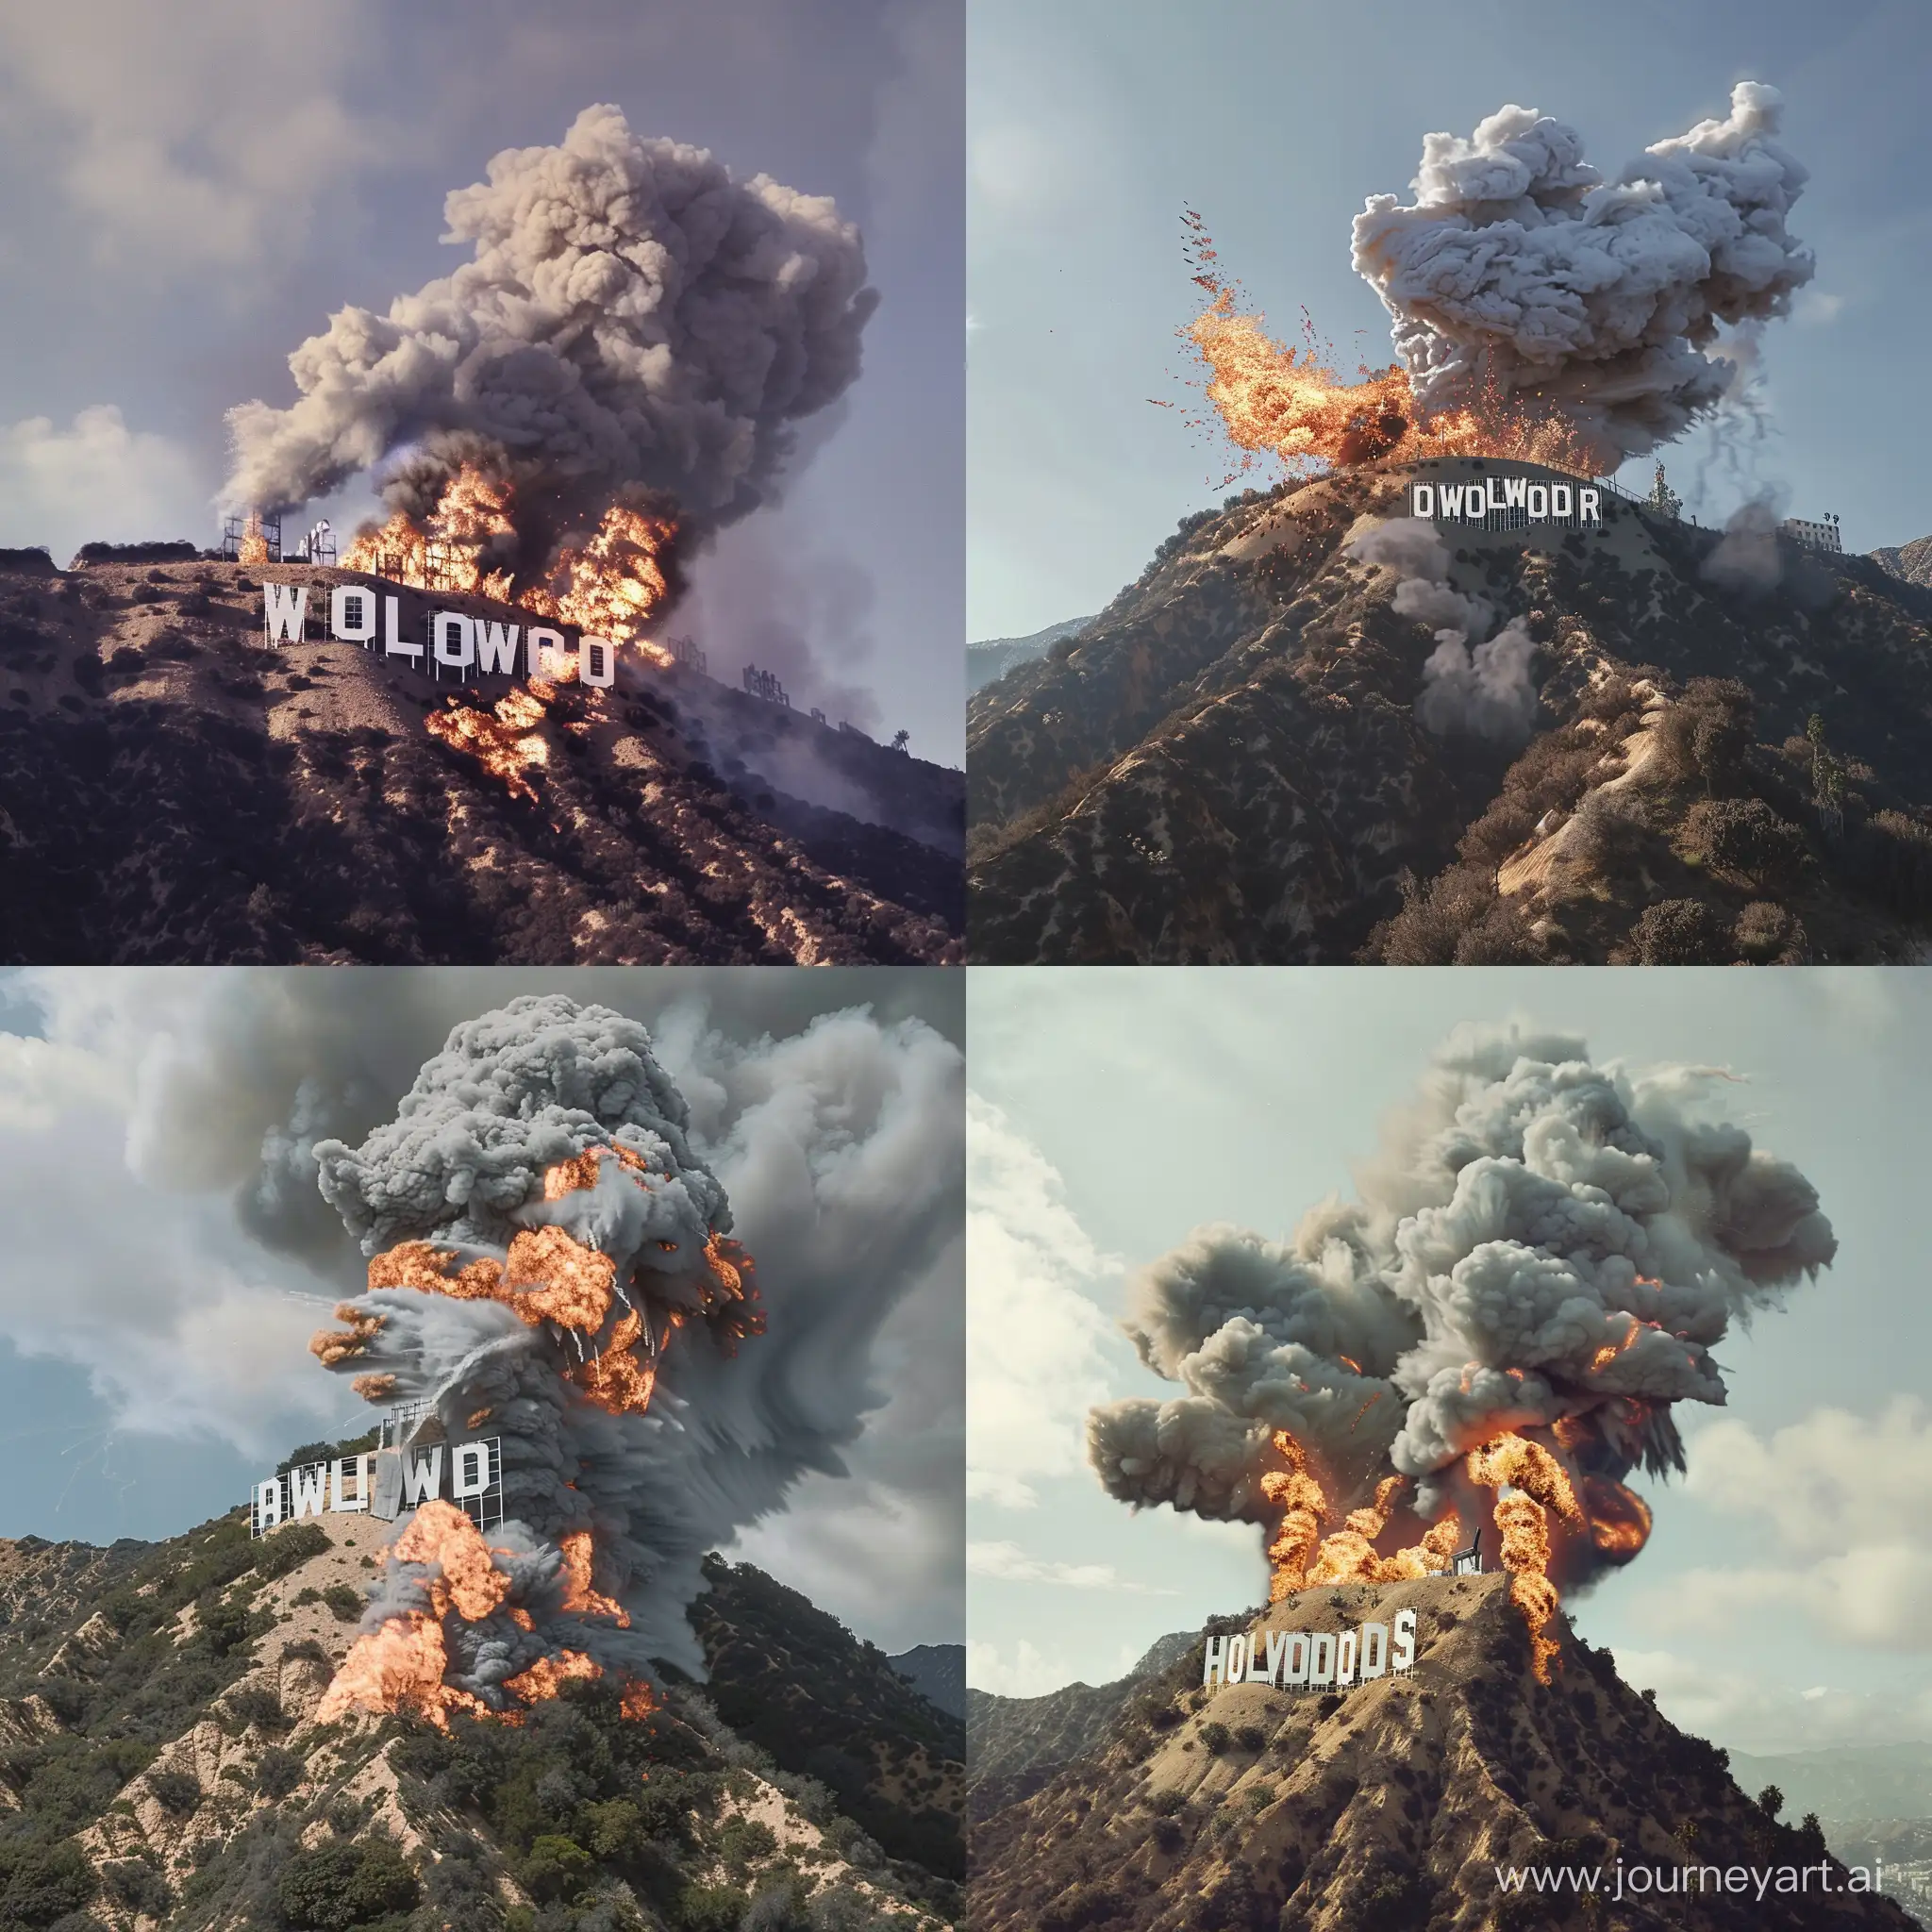 photo-realistic, the Hollywood sign burns and explodes on top of the mountain, smoke billows upwards